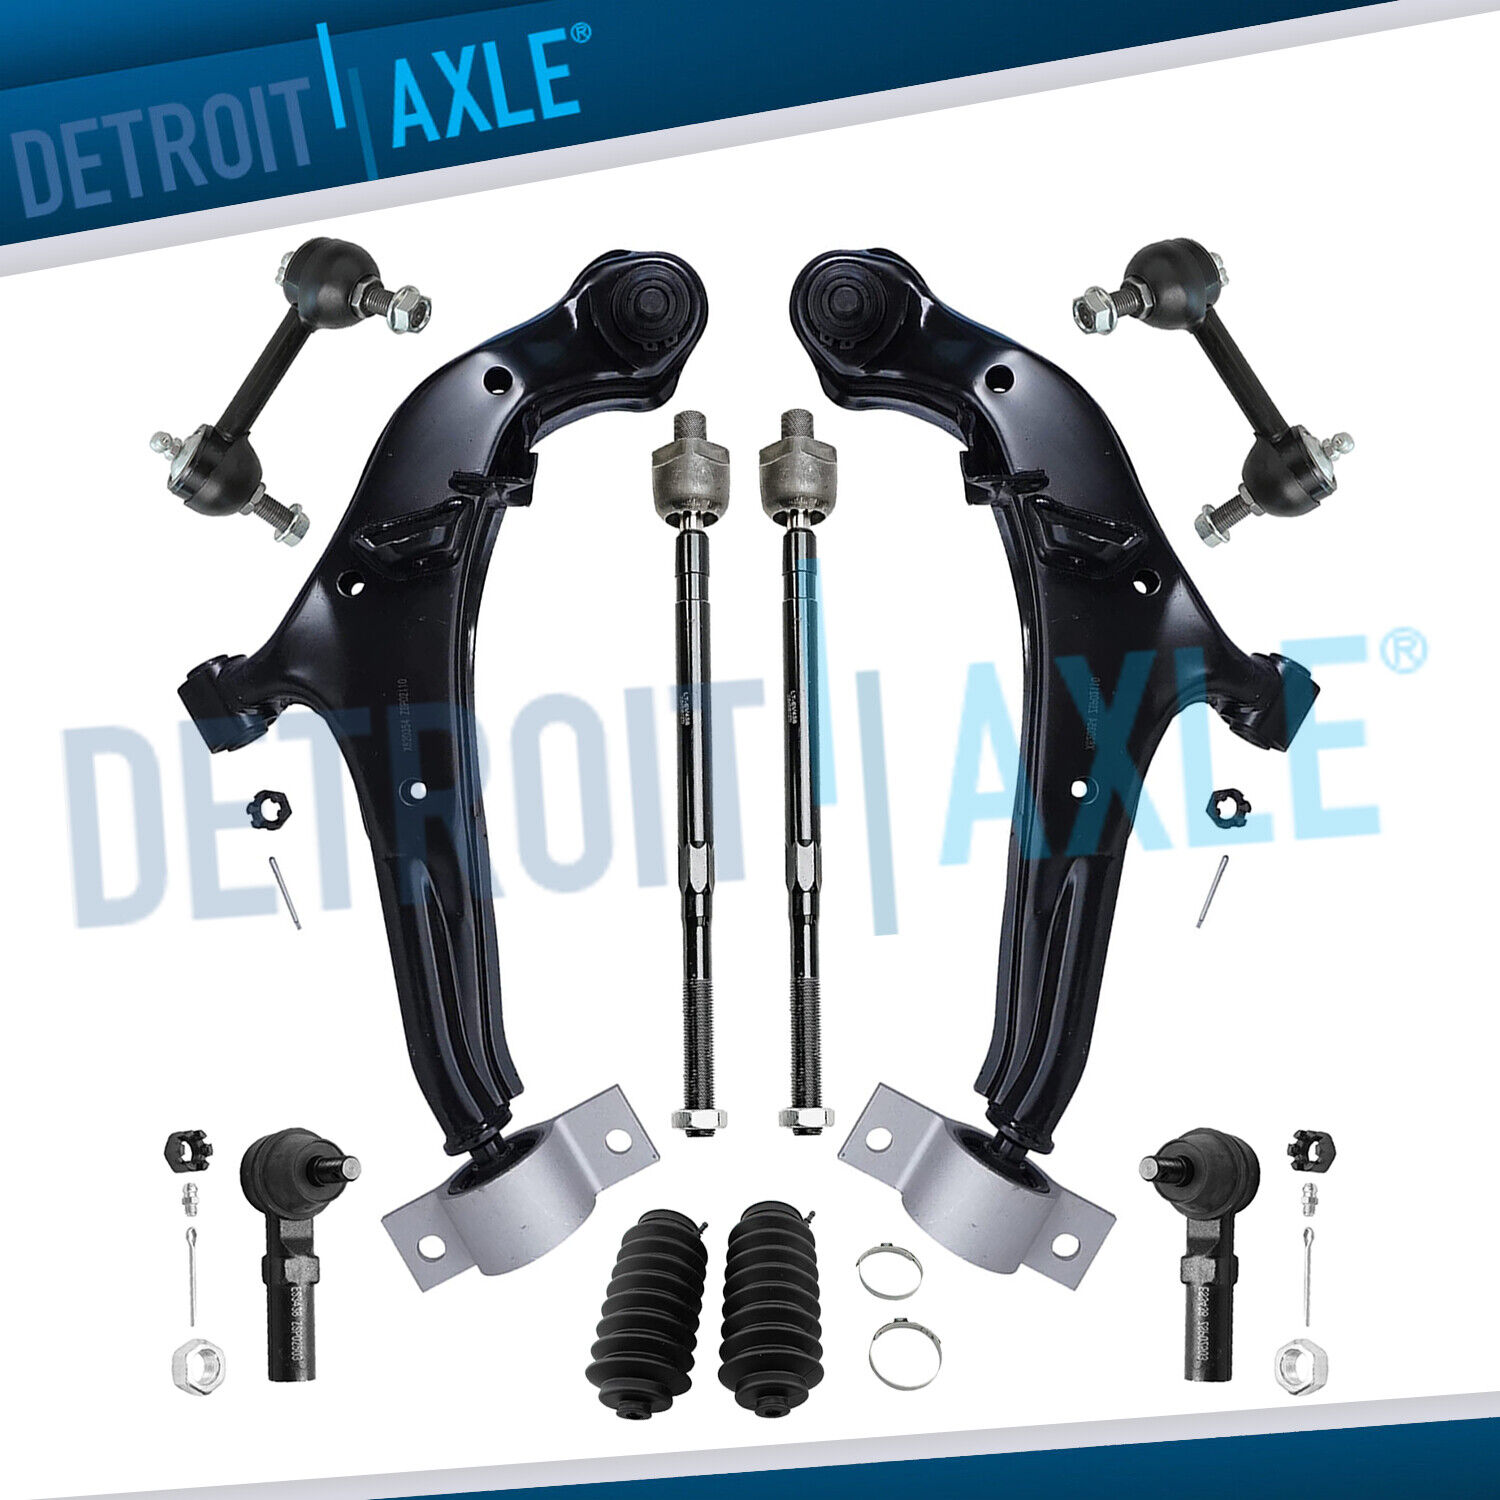 10pc Front Lower Control Arms Tie Rods Suspension Kit for Nissan Maxima i30 i35